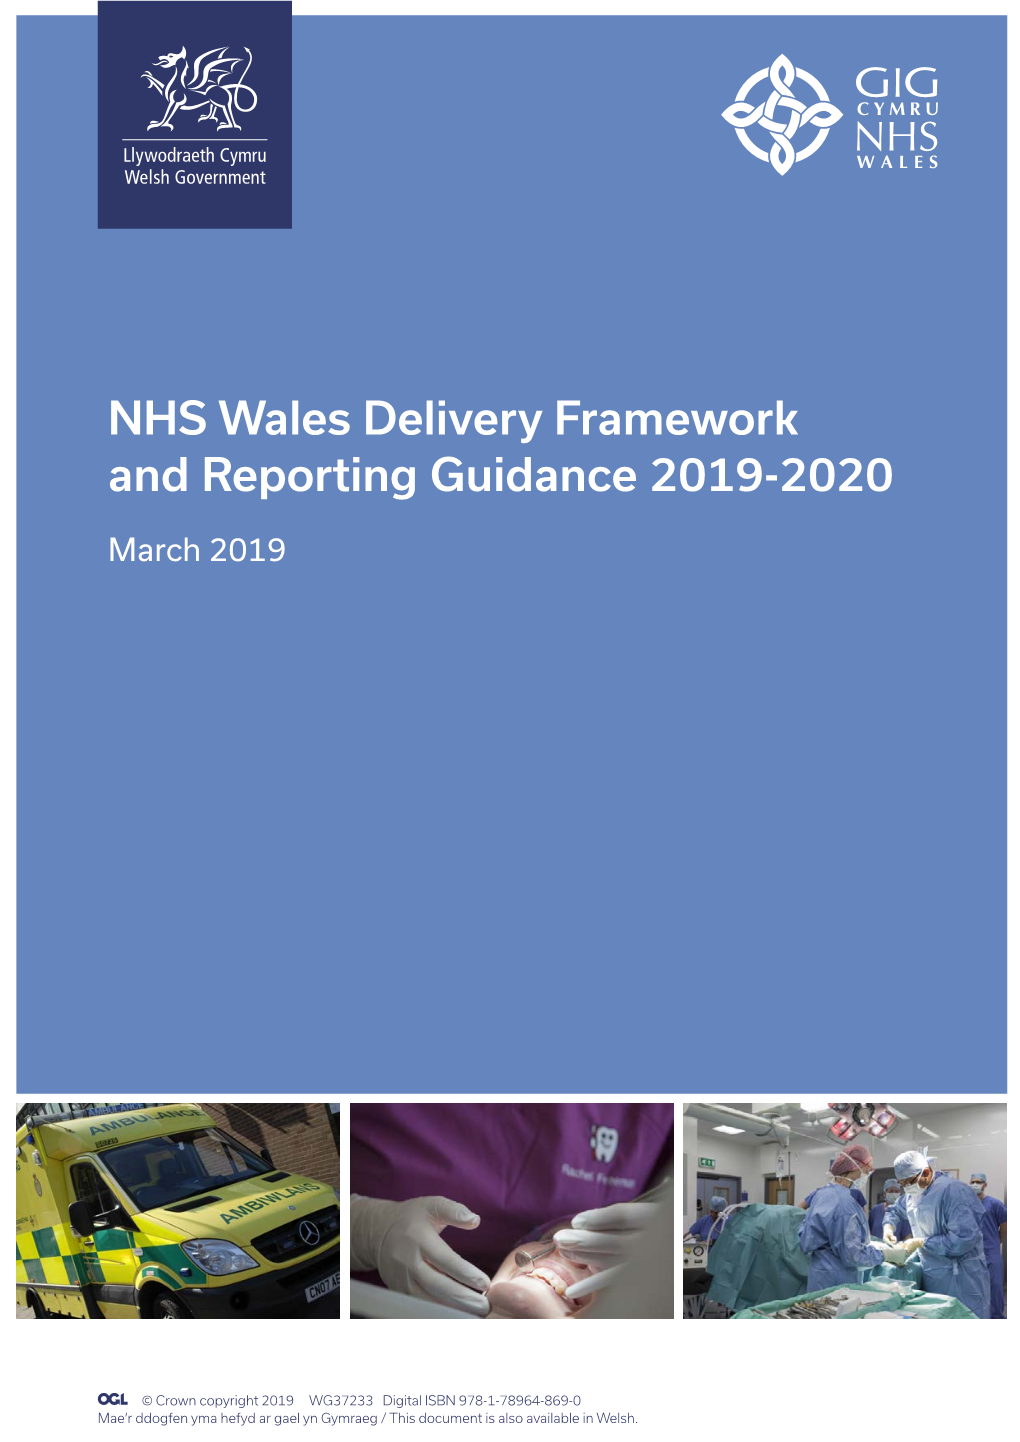 NHS Wales Delivery Framework and Reporting Guidance 2019-2020